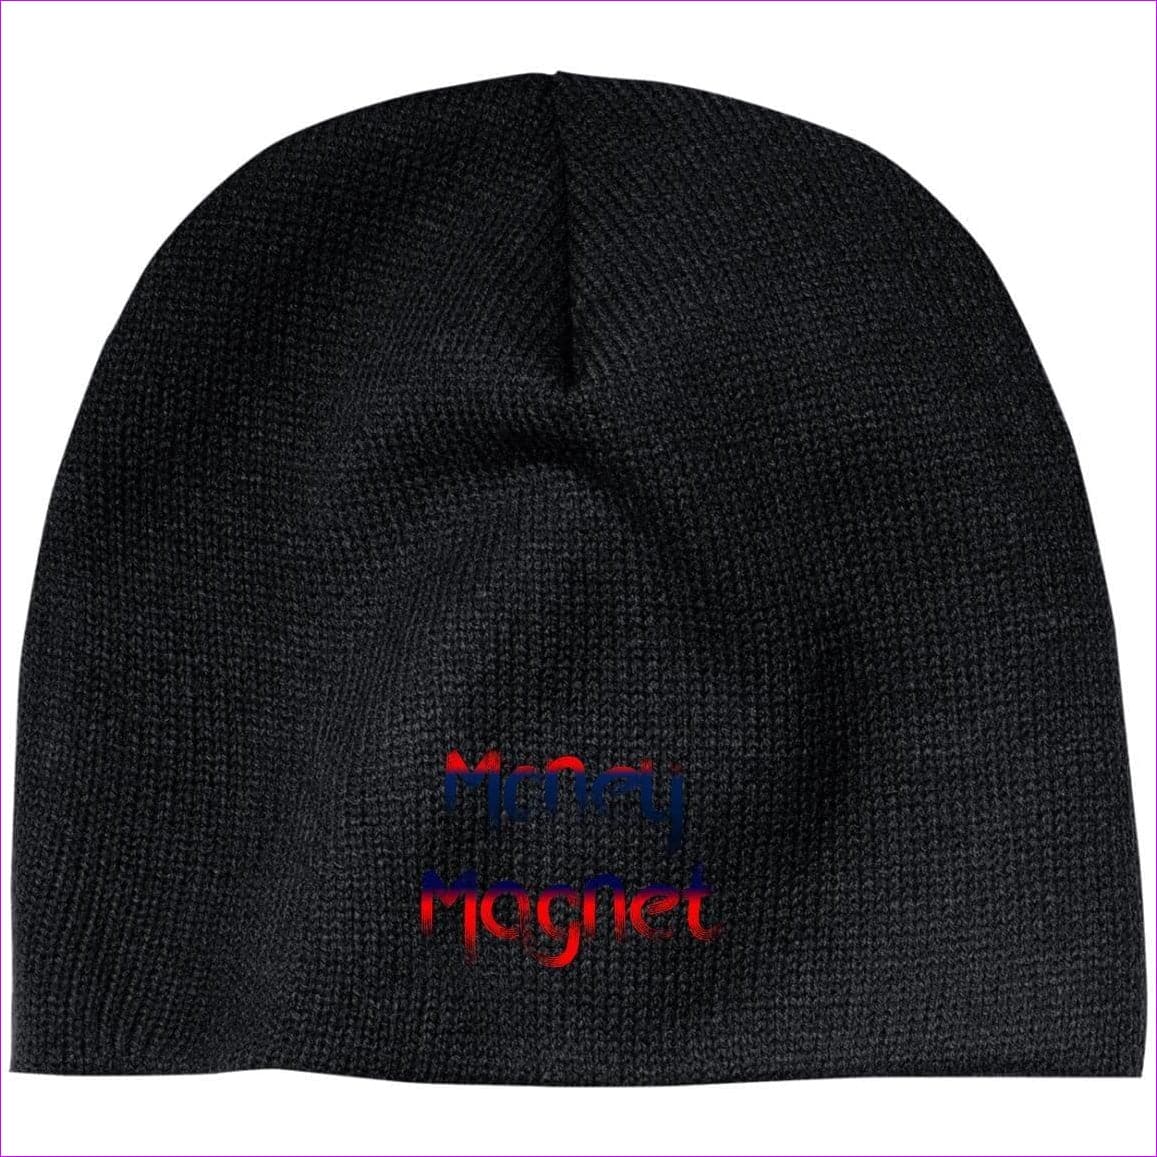 CP91 100% Acrylic Beanie Black One Size Money Magnet Embroidered Knit Cap, Cap, Beanie - Beanie at TFC&H Co.